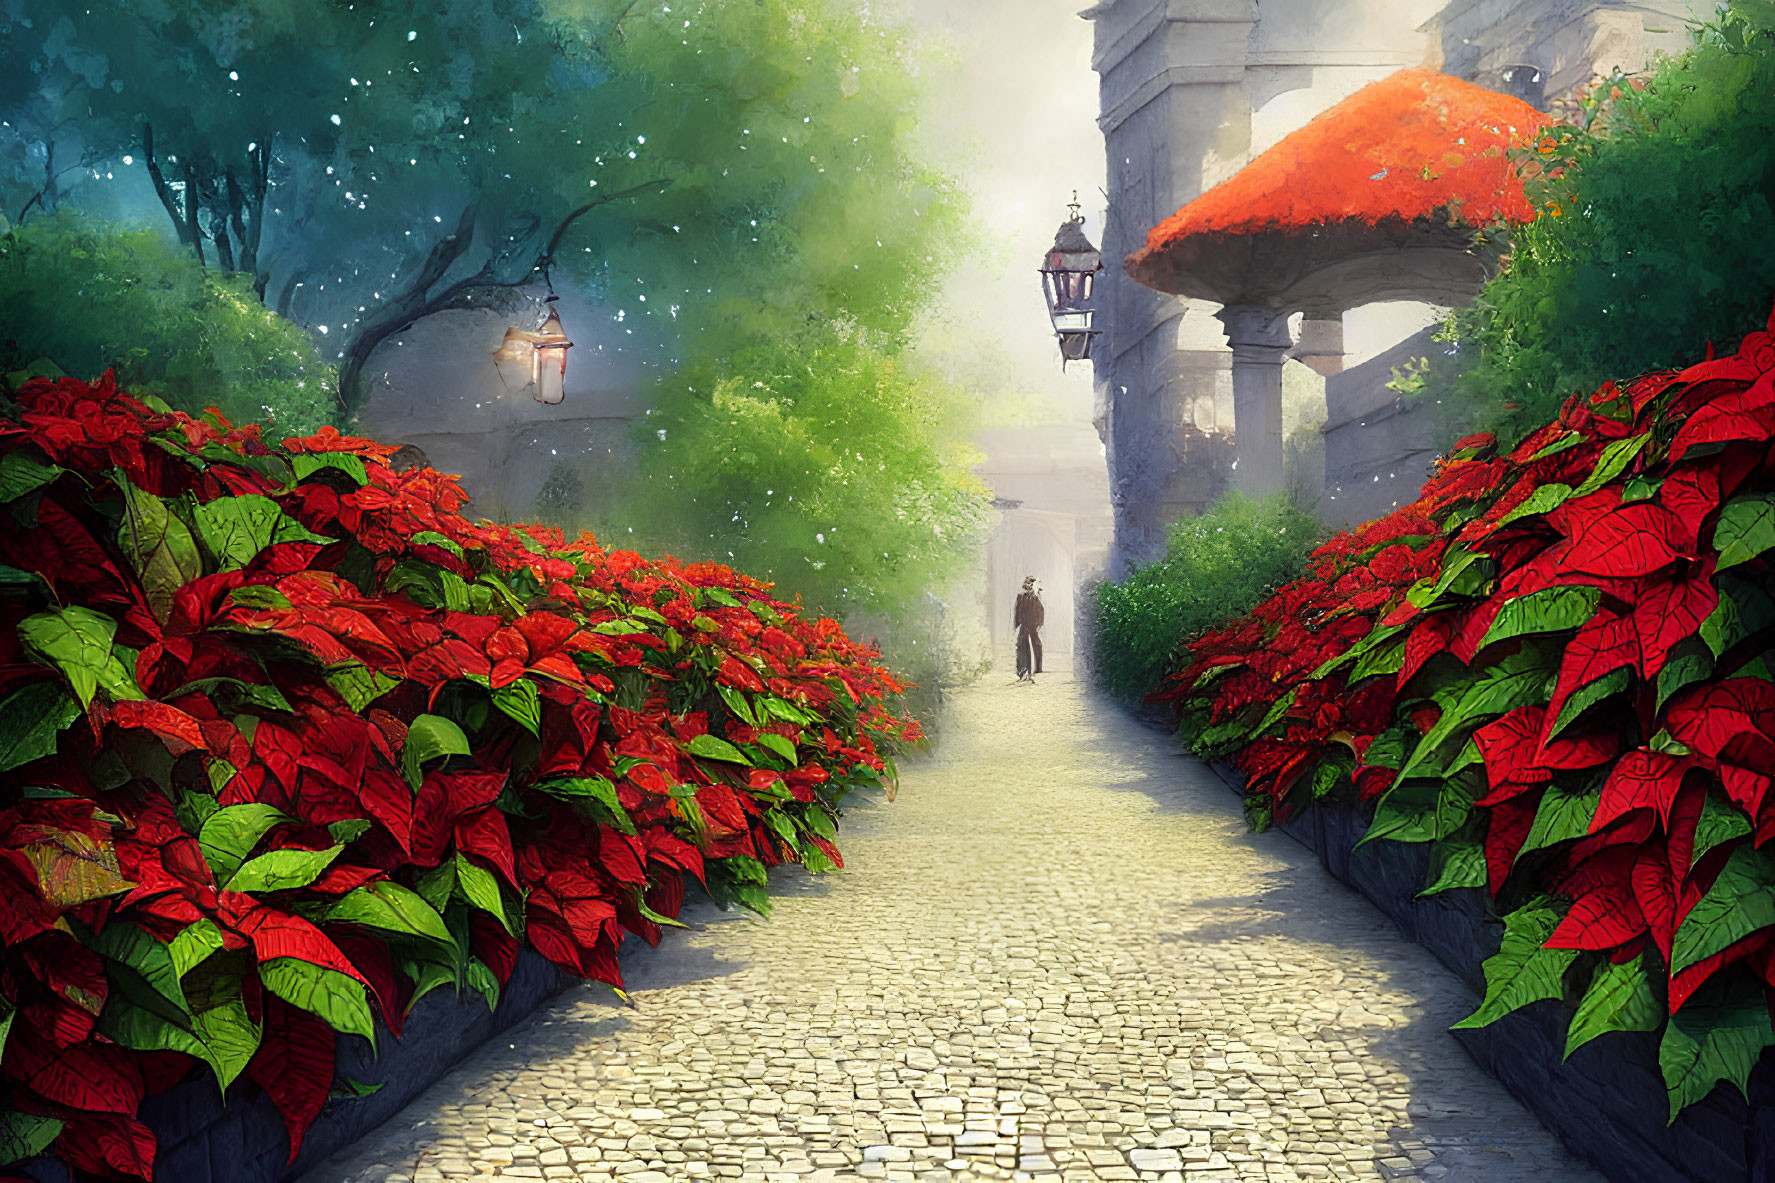 Tranquil garden pathway with red poinsettias and glowing street lamps